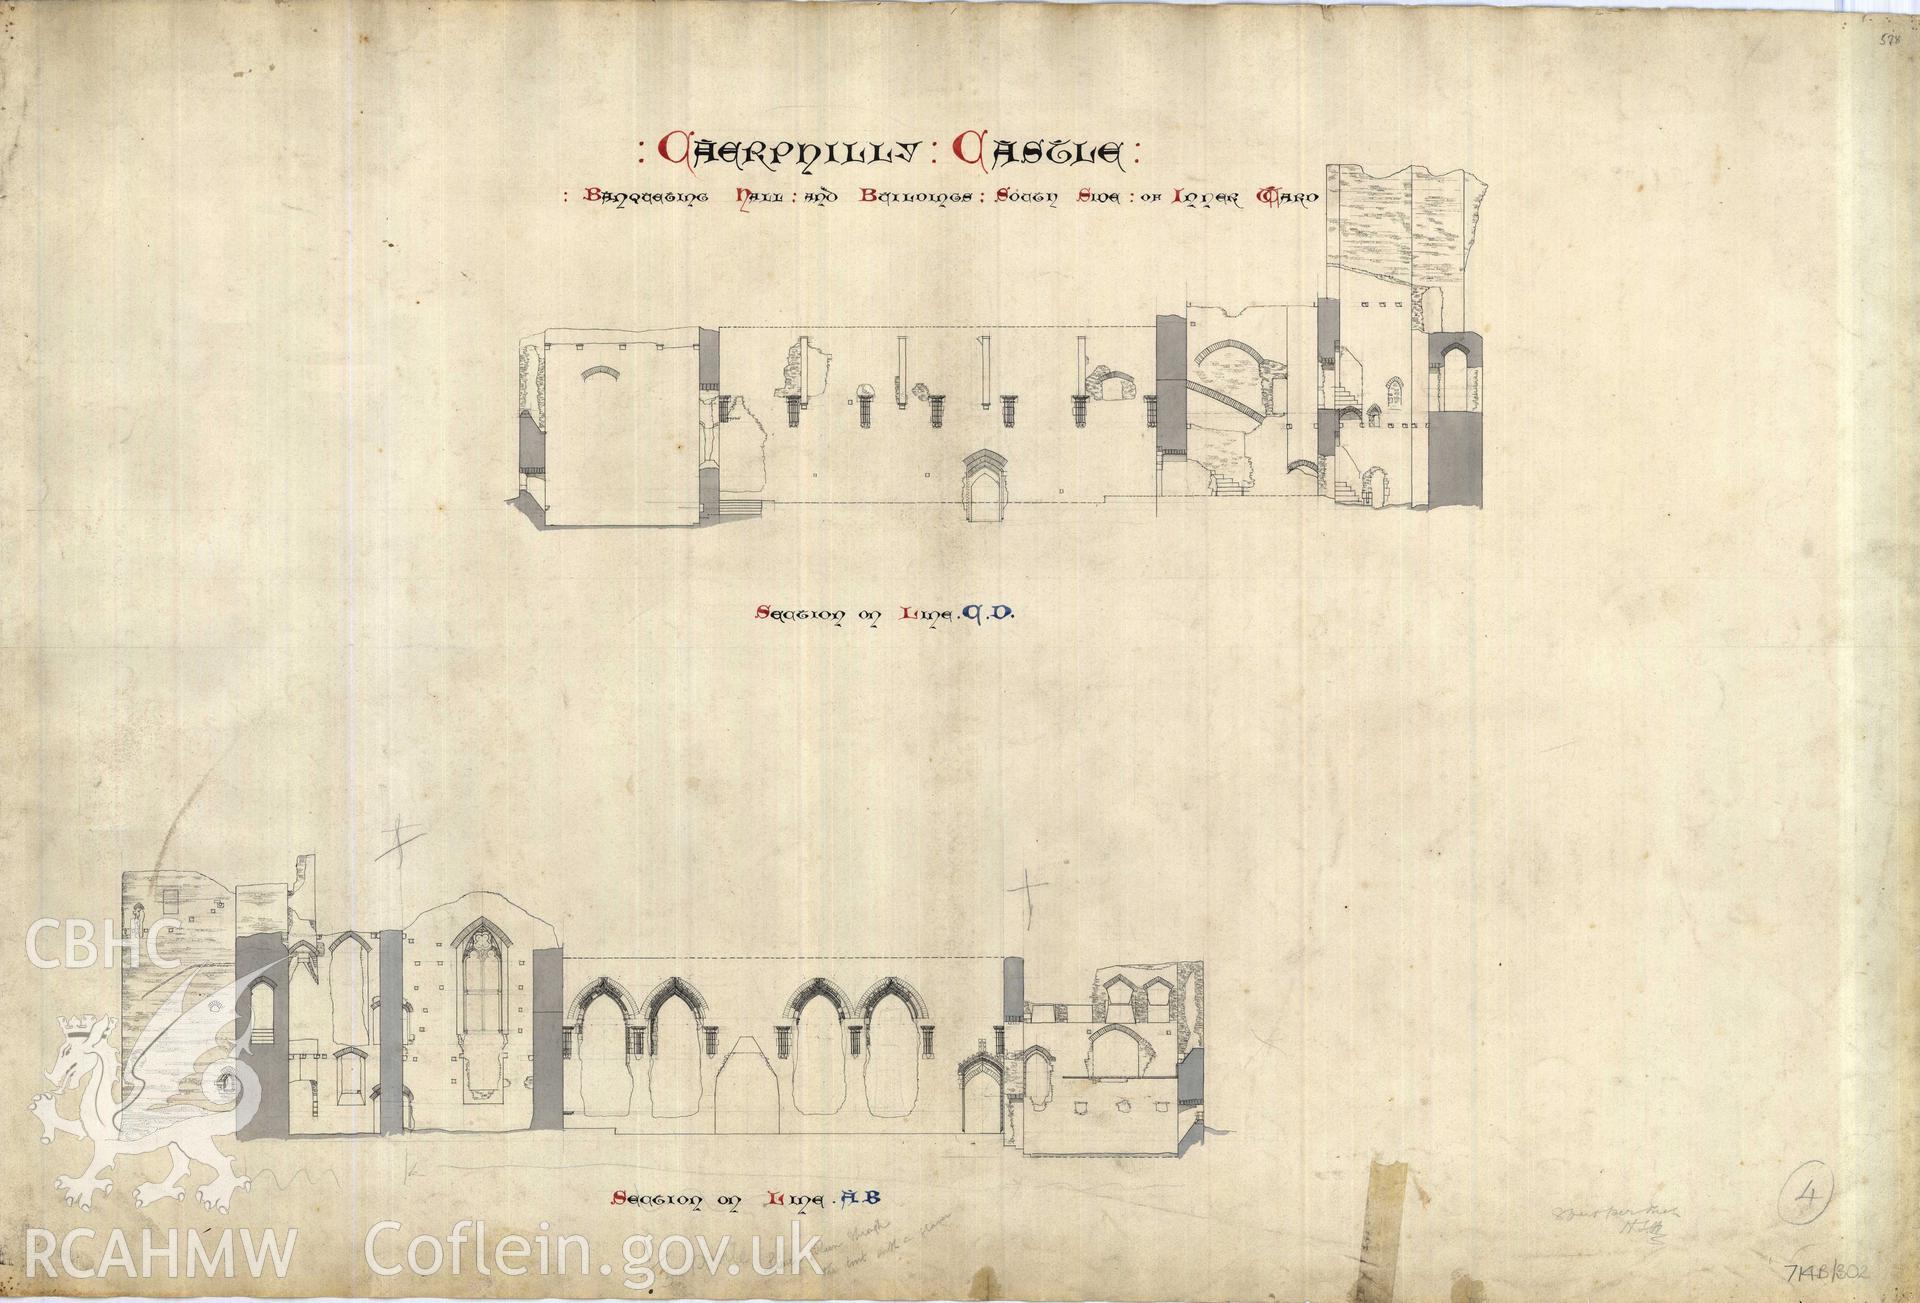 Cadw guardianship monument drawing of Caerphilly Castle. Hall range, long elevation/section. Cadw Ref. No:714B/302. Scale 1:96.